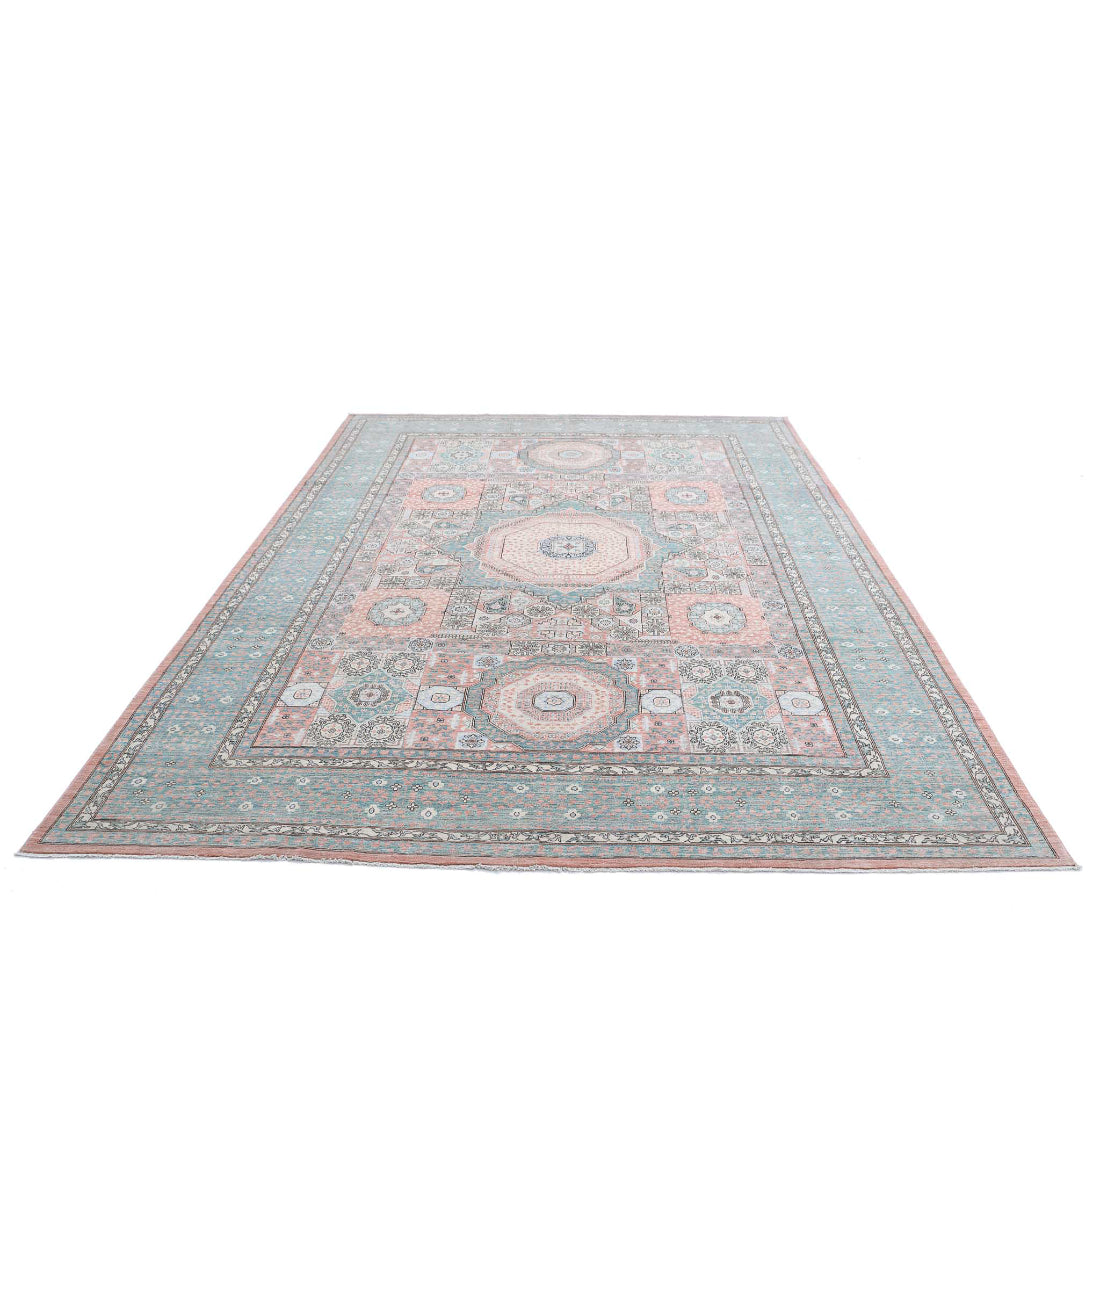 Mamluk 8'1'' X 11'1'' Hand-Knotted Wool Rug 8'1'' x 11'1'' (243 X 333) / Pink / N/A